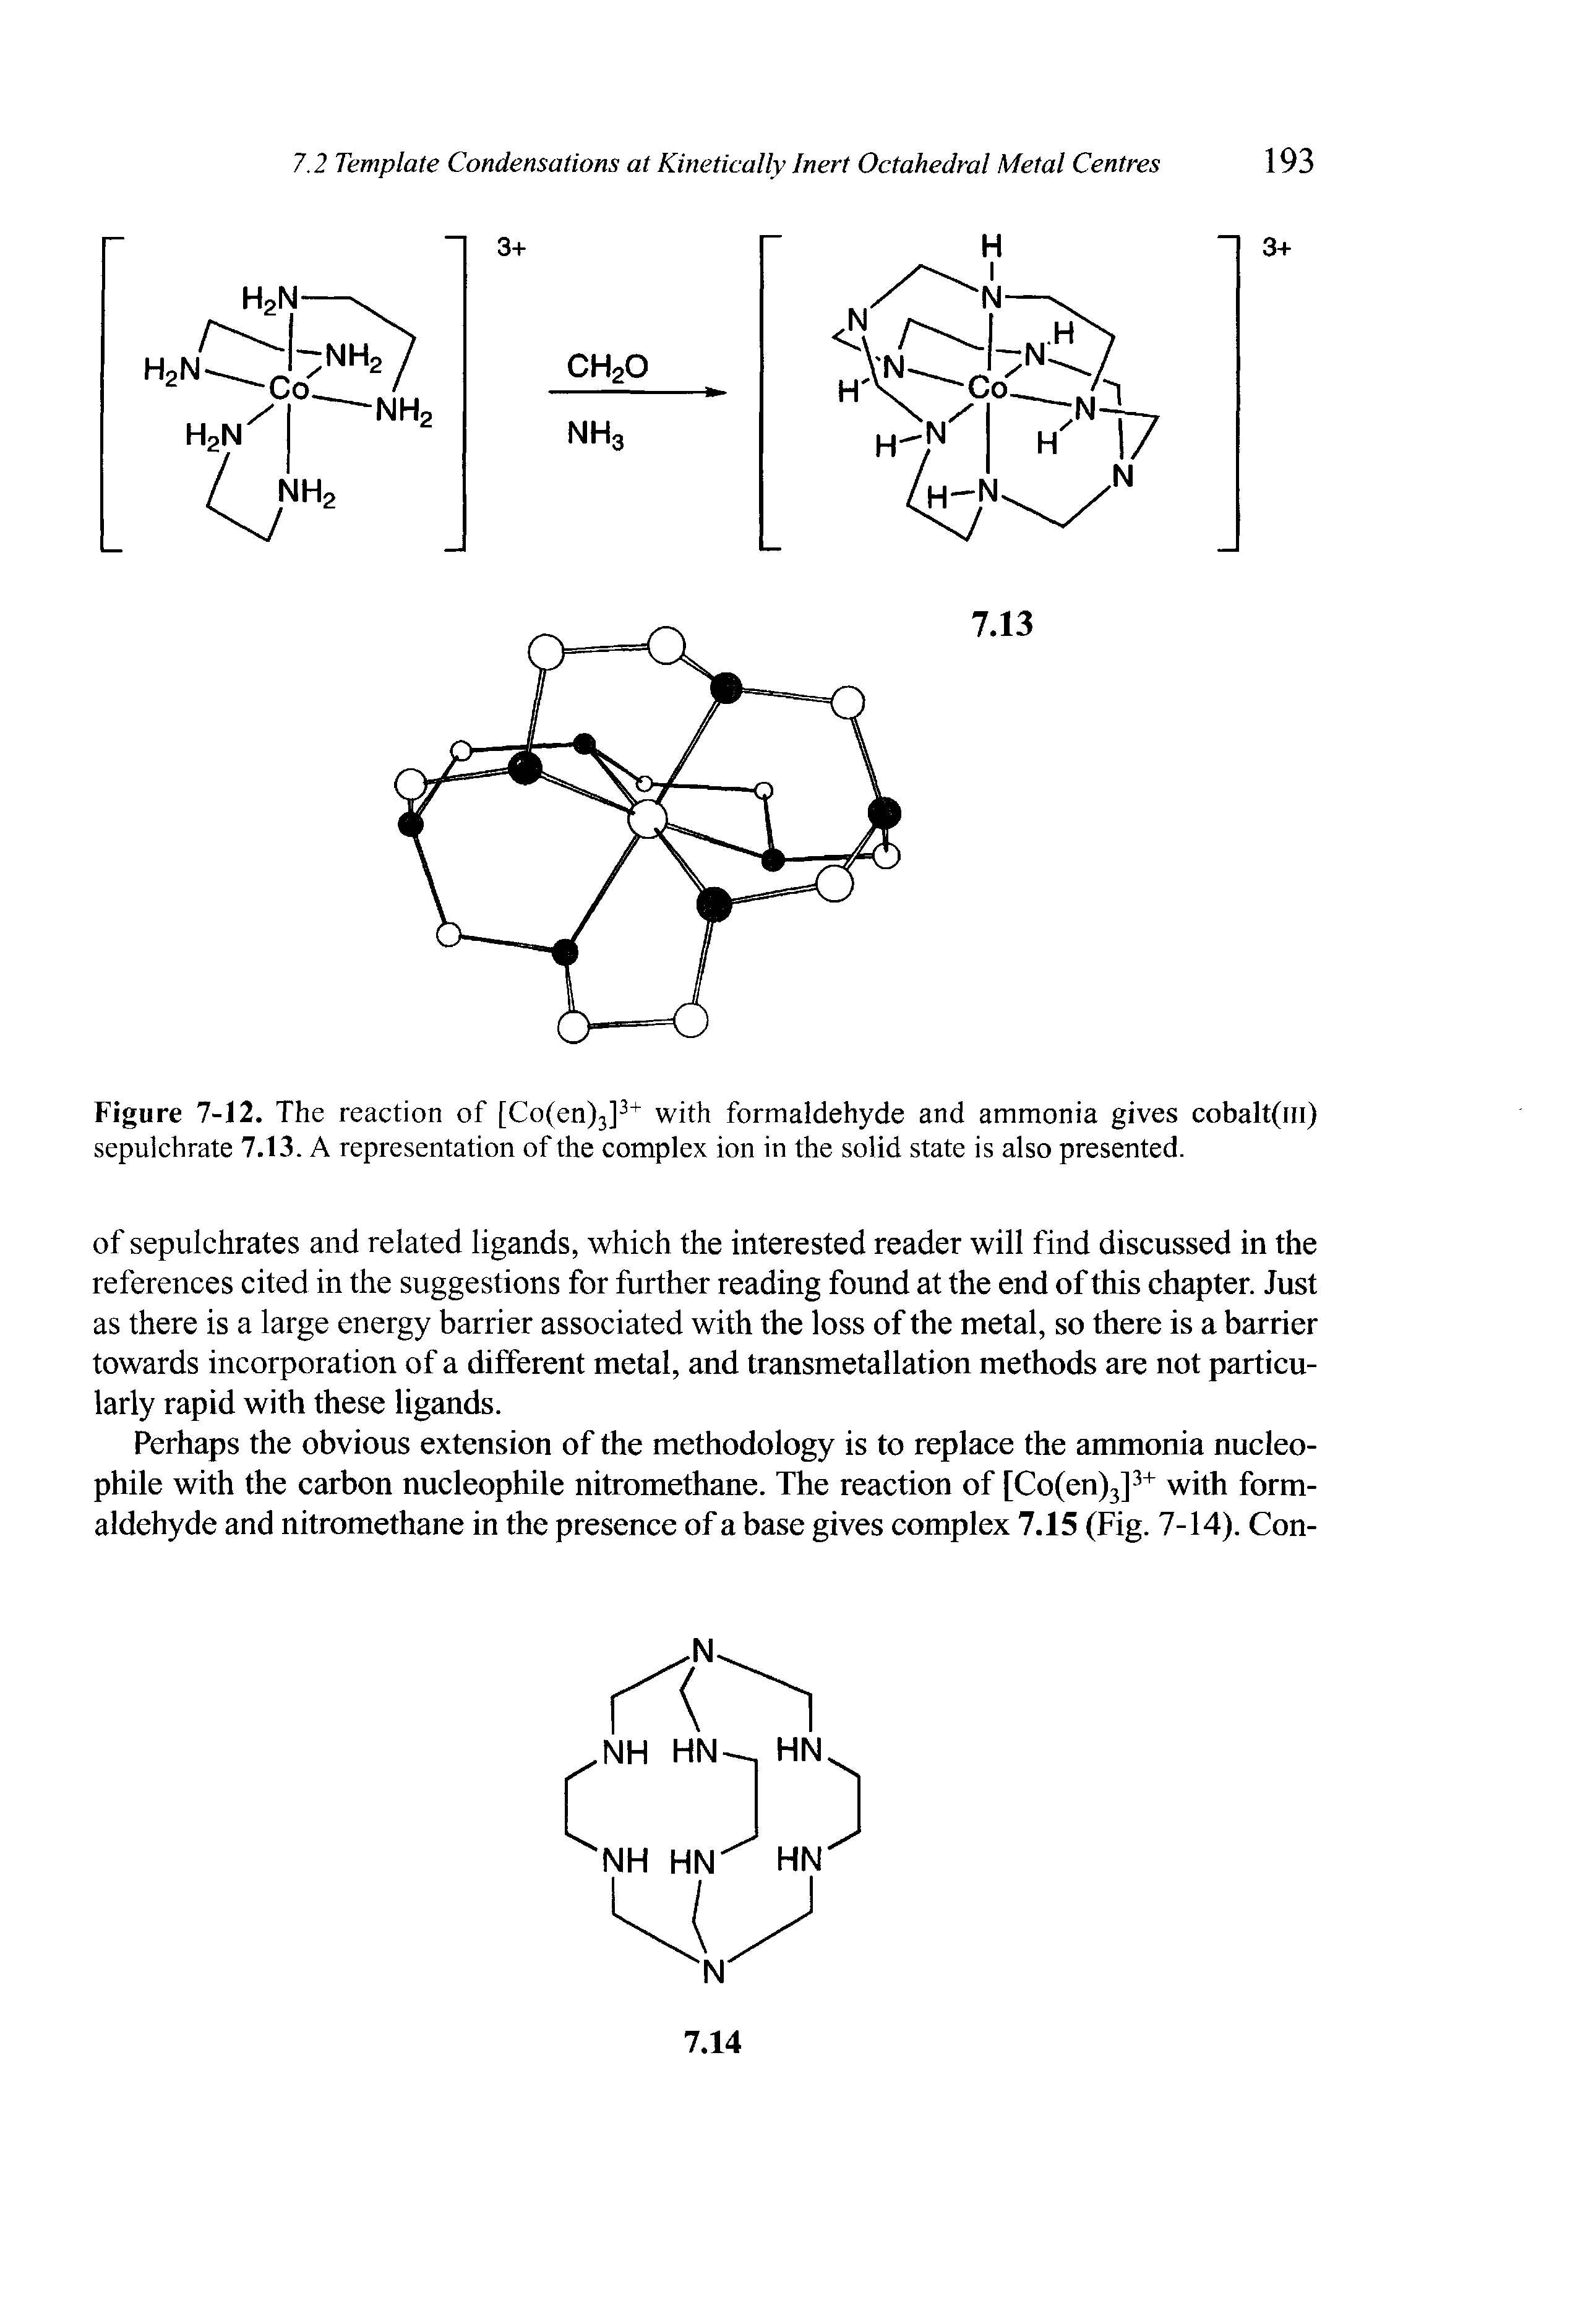 Figure 7-12. The reaction of [Co(en)3]3+ with formaldehyde and ammonia gives cobalt(m) sepulchrate 7.13. A representation of the complex ion in the solid state is also presented.